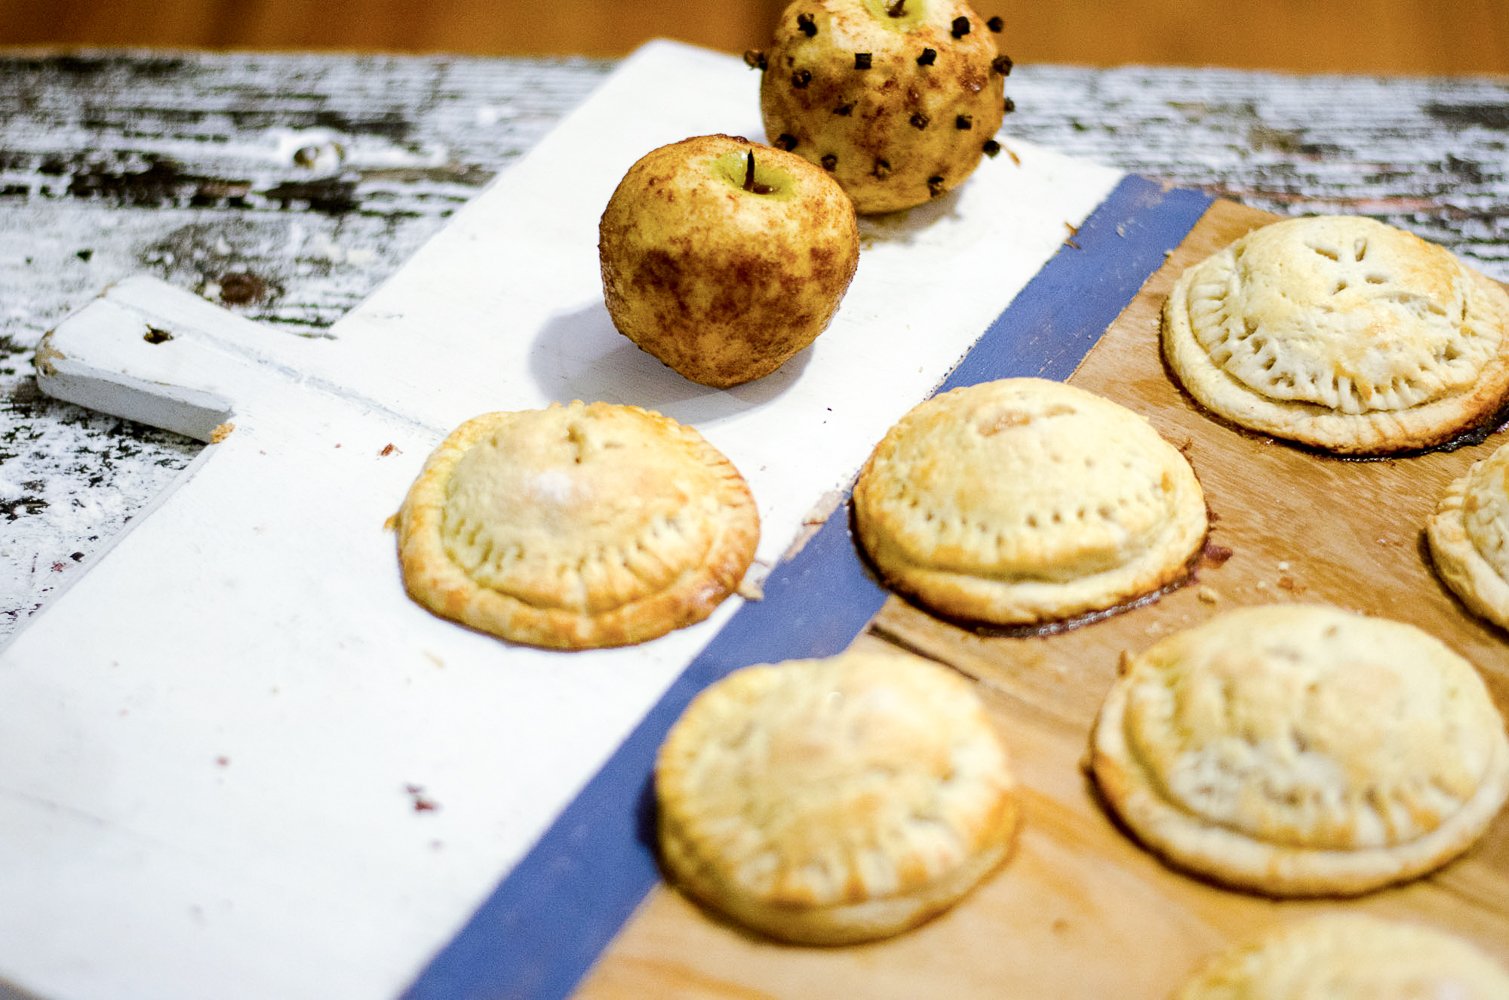 The Kentucky Gent, a Louisville, Kentucky life and style blogger, shares his recipe for Salted Caramel Apple Hand Pies.